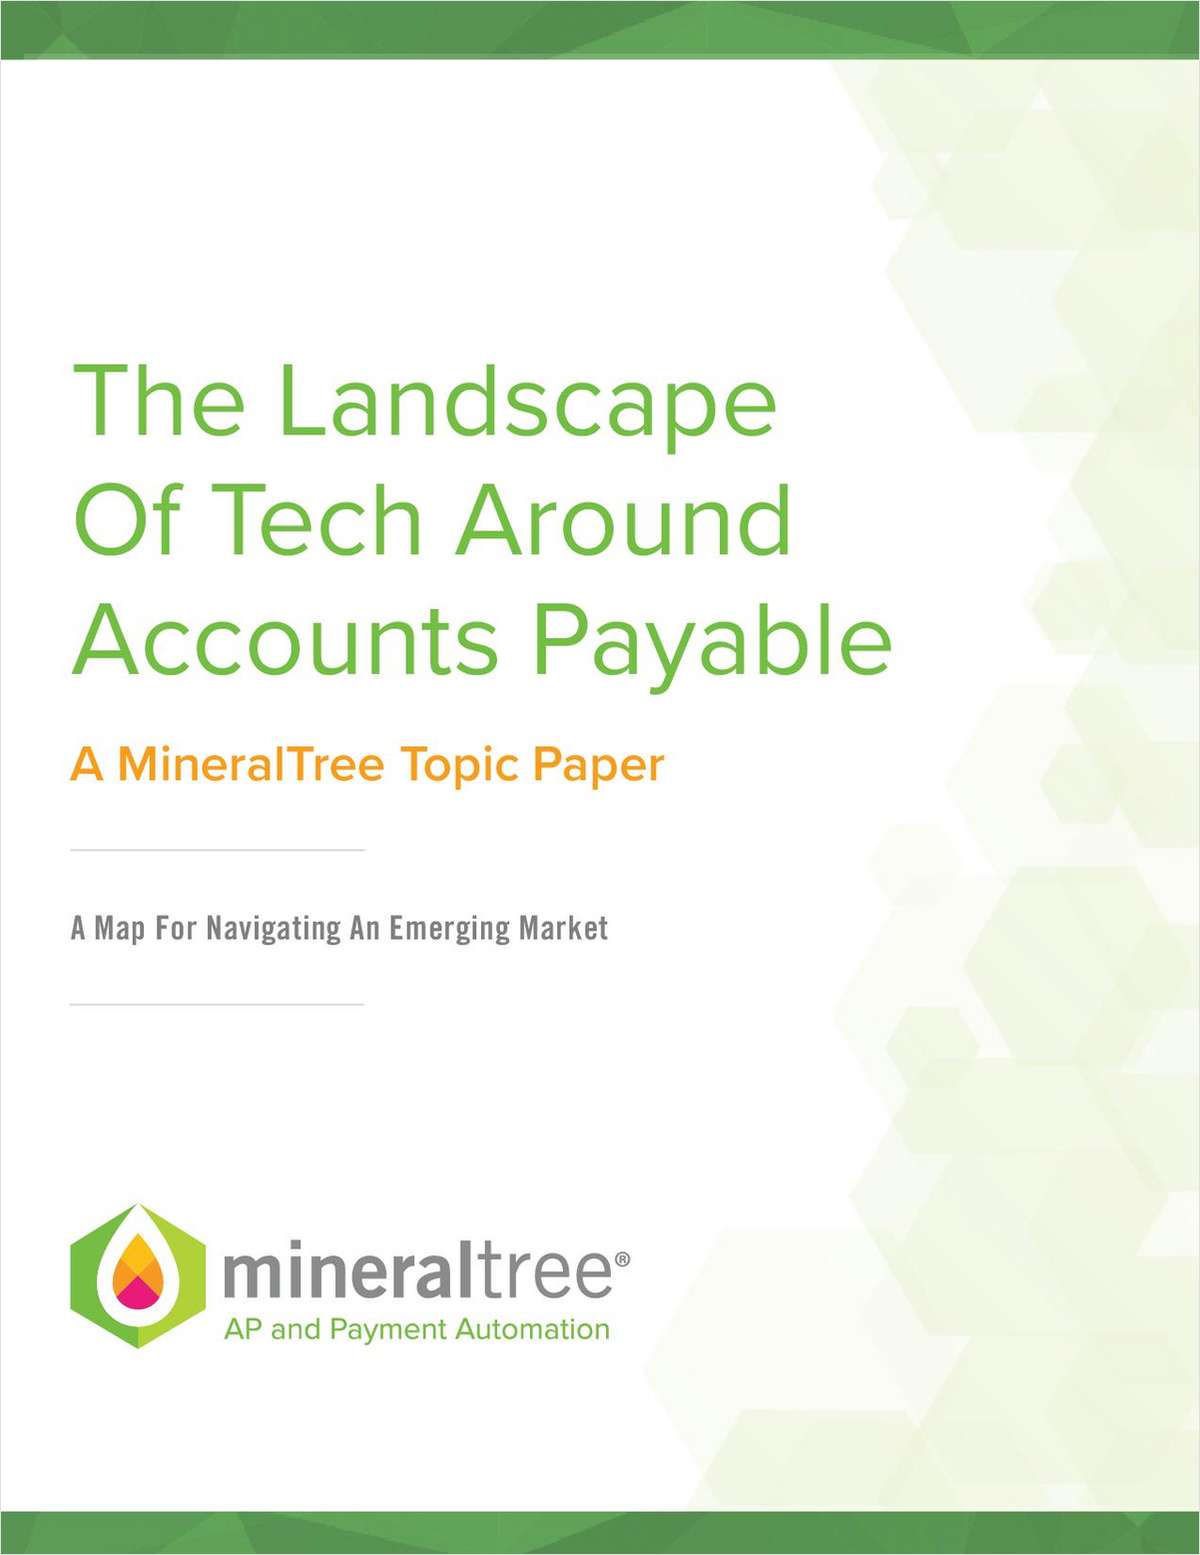 The Landscape of Technologies for Accounts Payable Automation